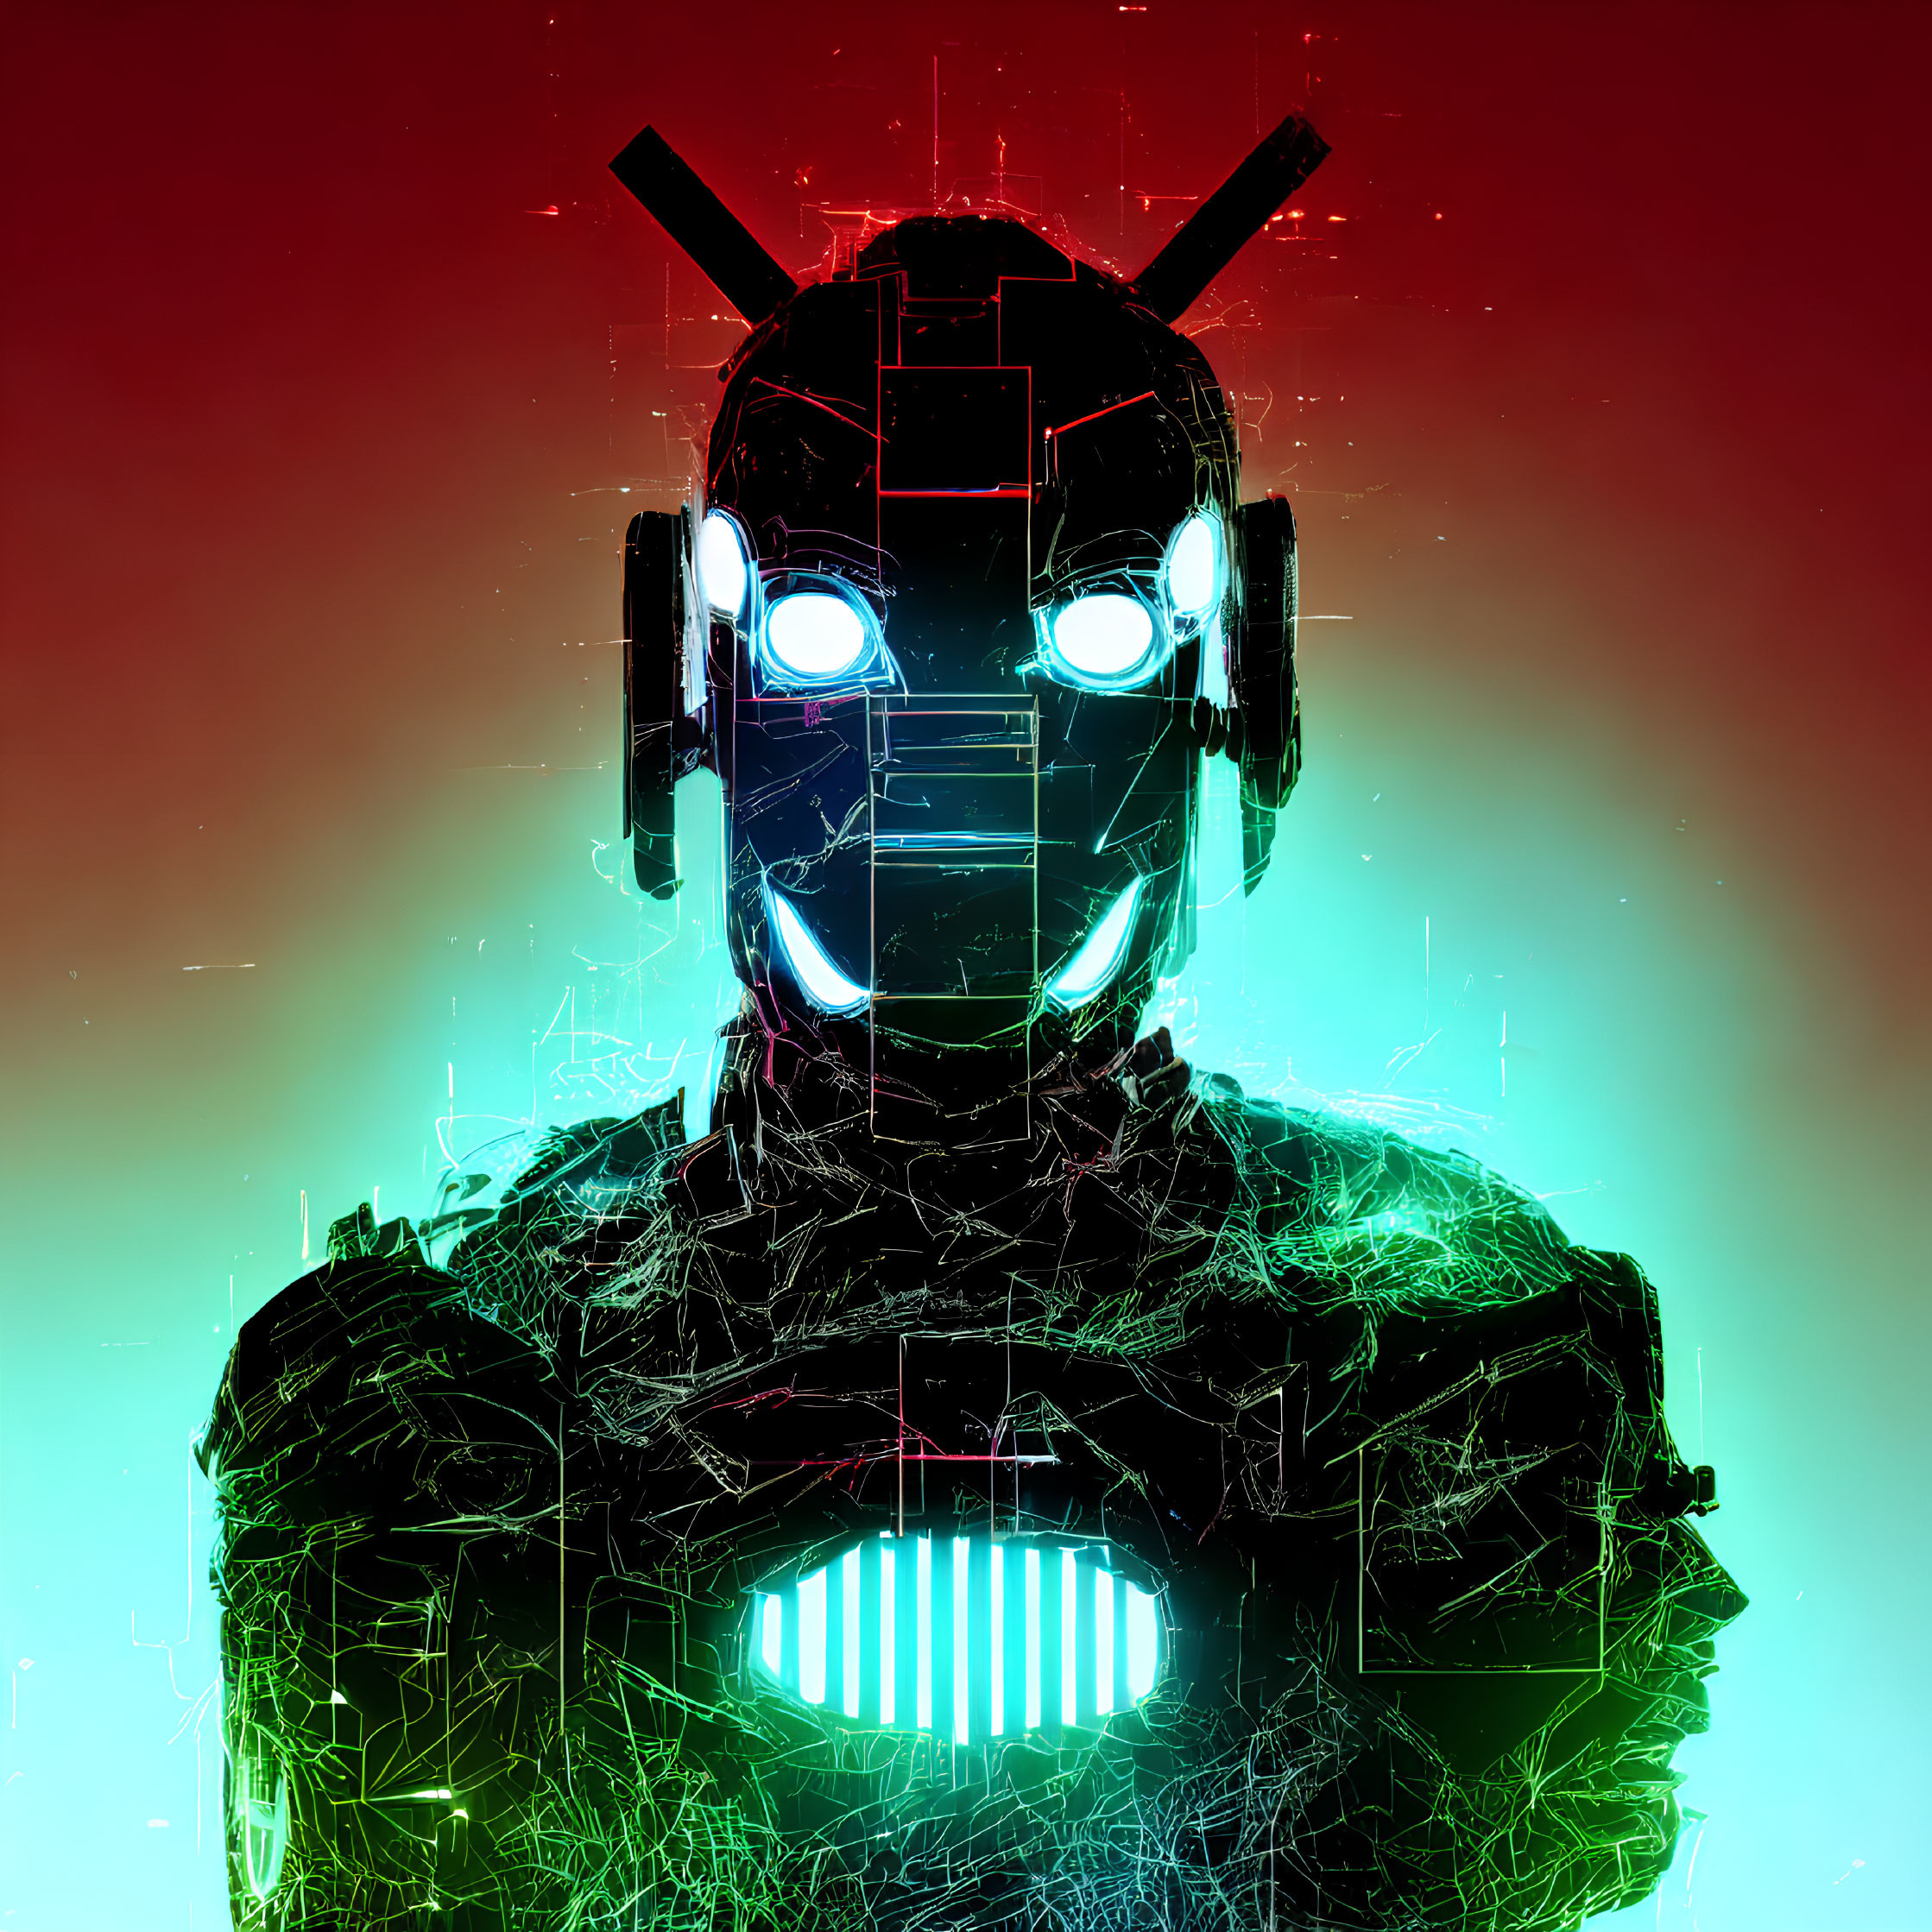 Futuristic Robot with Glowing Eyes on Red and Green Gradient Background